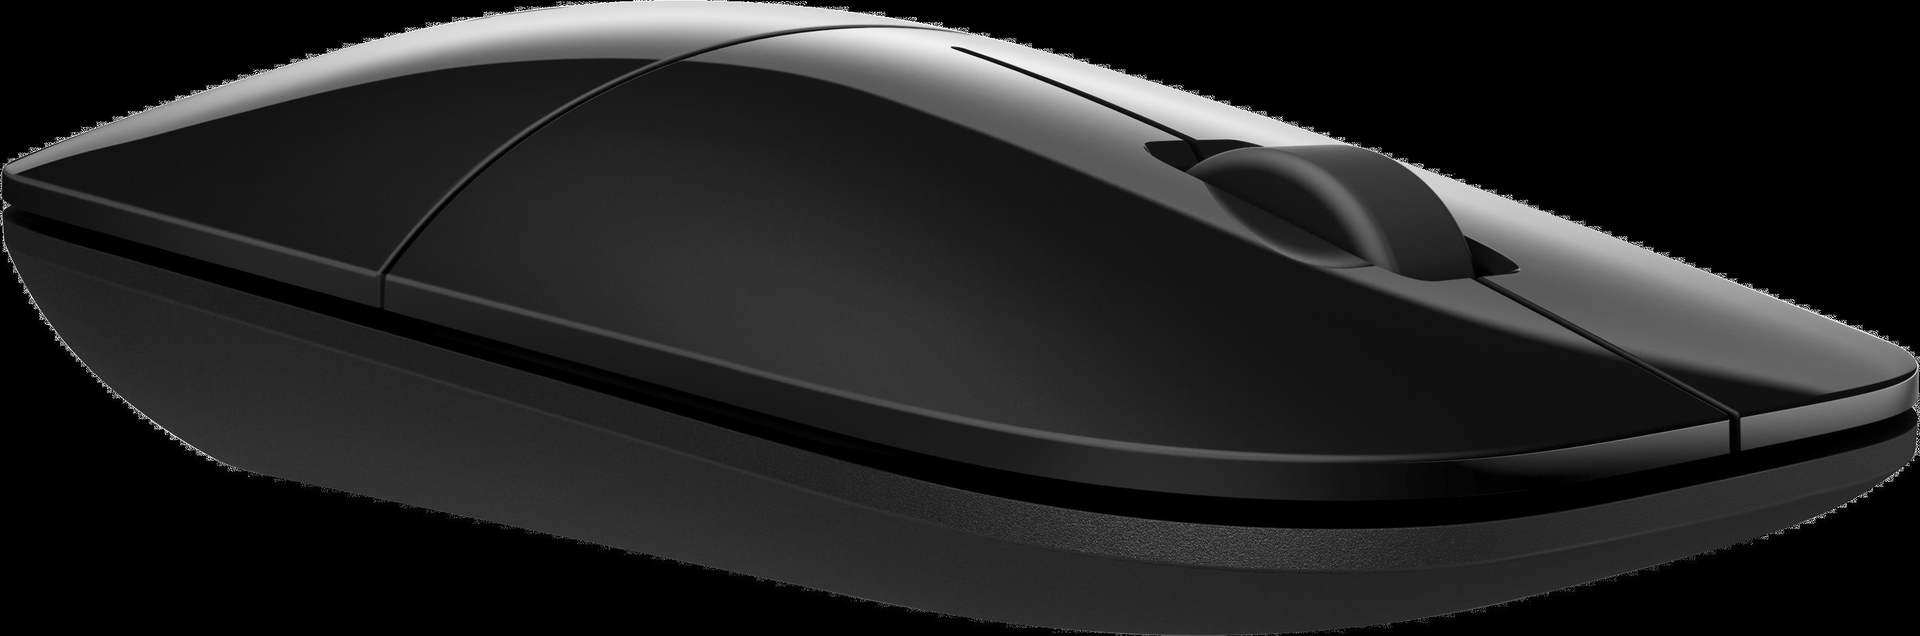 HP Inc. Z3700 BLACK WIRELESS MOUSE EUROPE- ENGLISH LOCALIZATION IN  V0L79AA#ABB